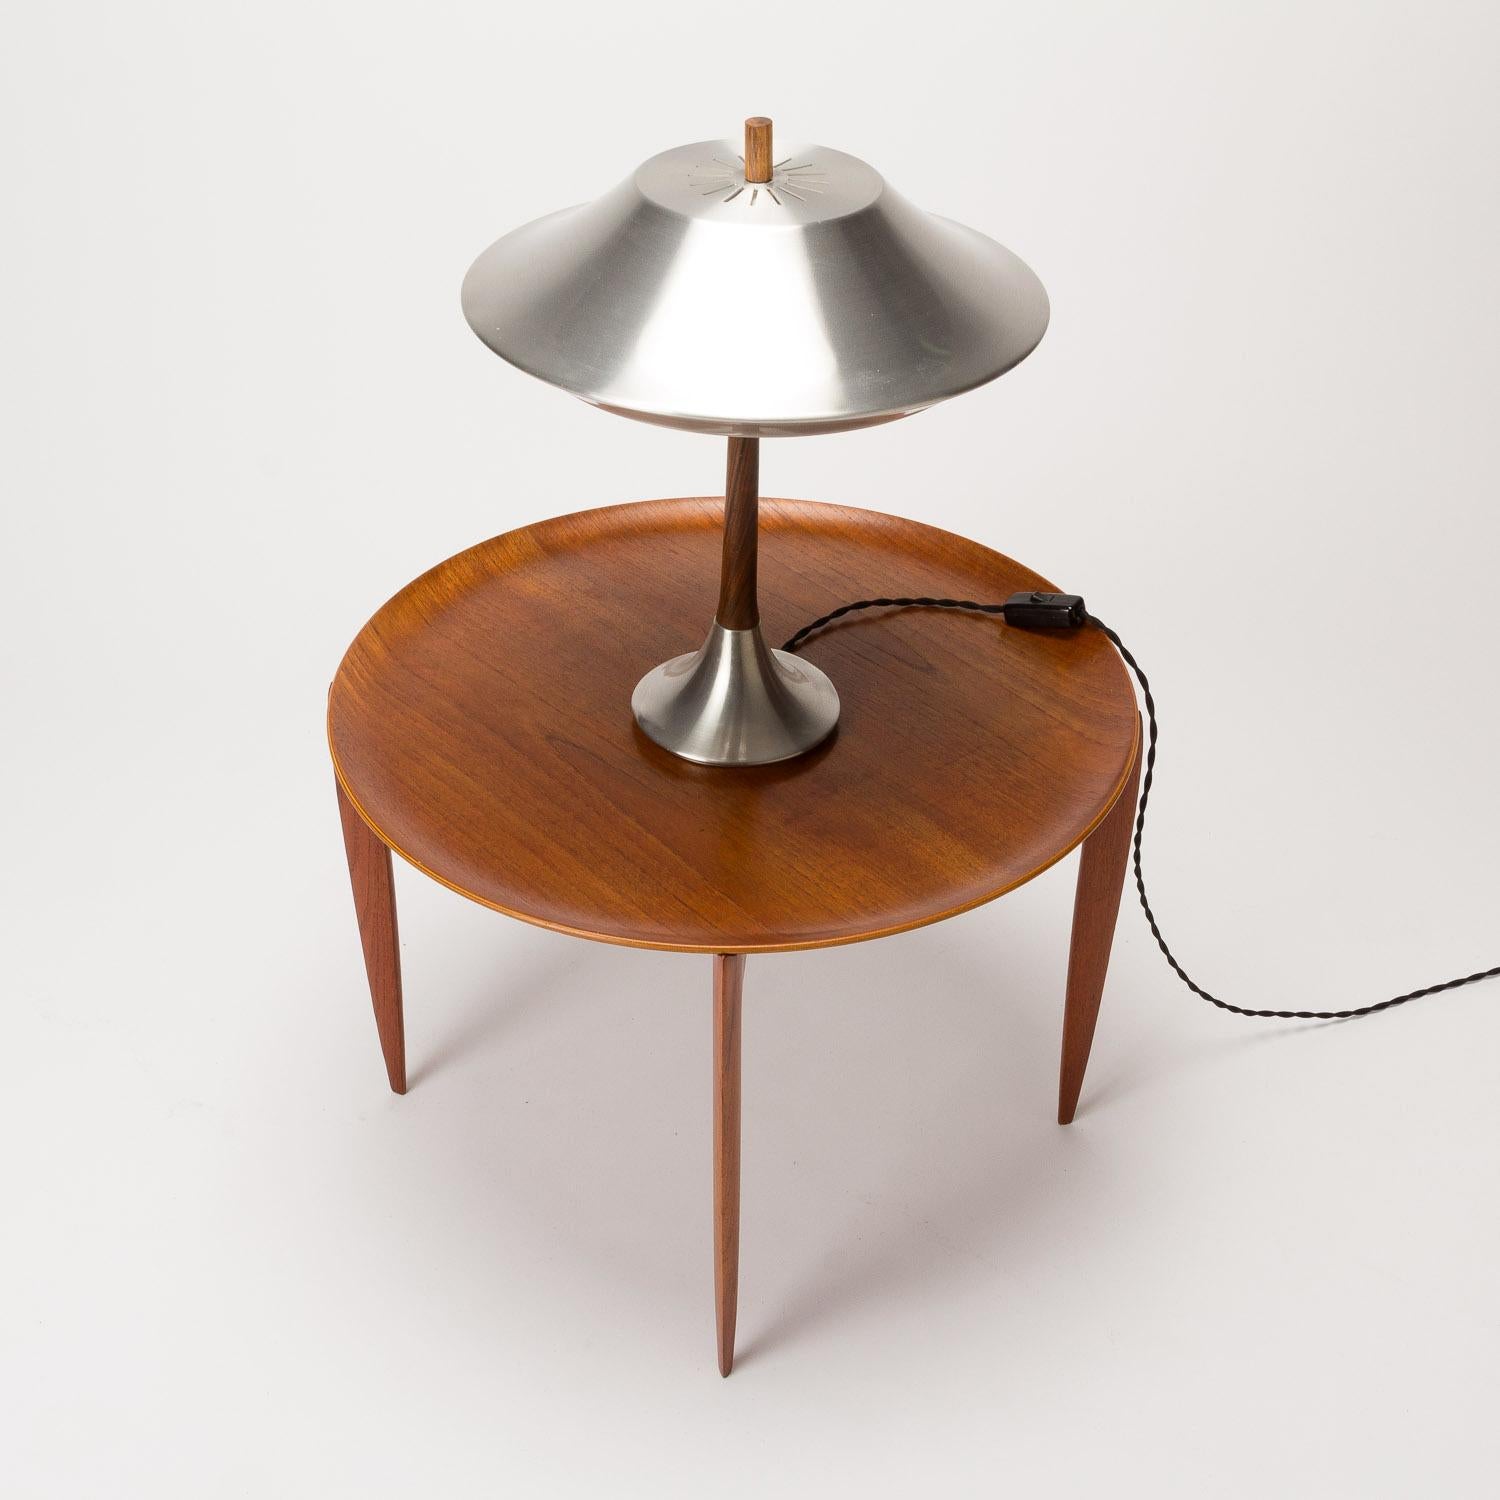 Teak Tray Table by H Engholm and Svend Aage Willumsen for Fritz Hansen, Denmark, 2